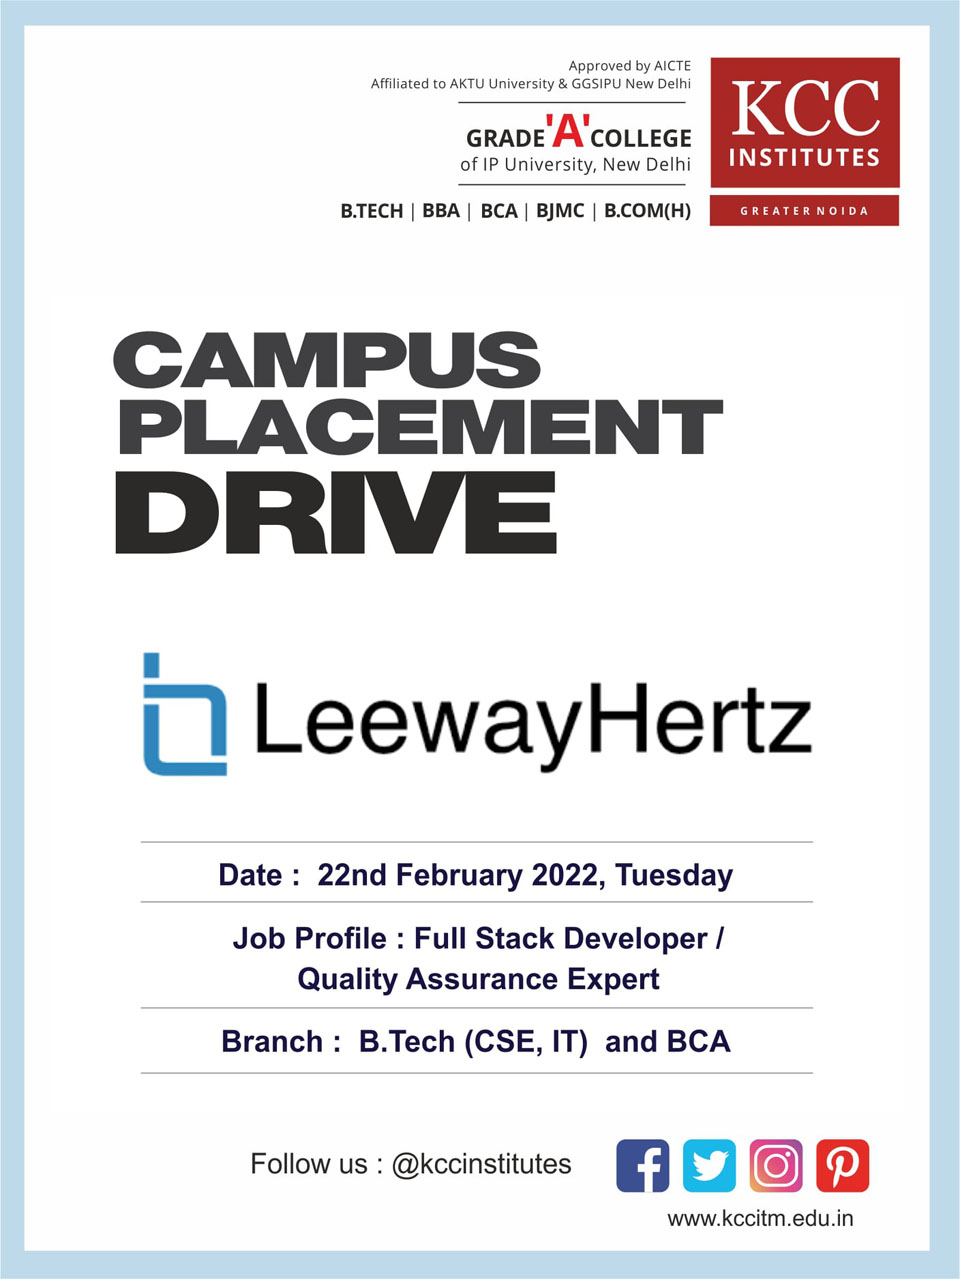 Campus Placement Drive for LeewayHertz on 22nd February 2022 (Tuesday)